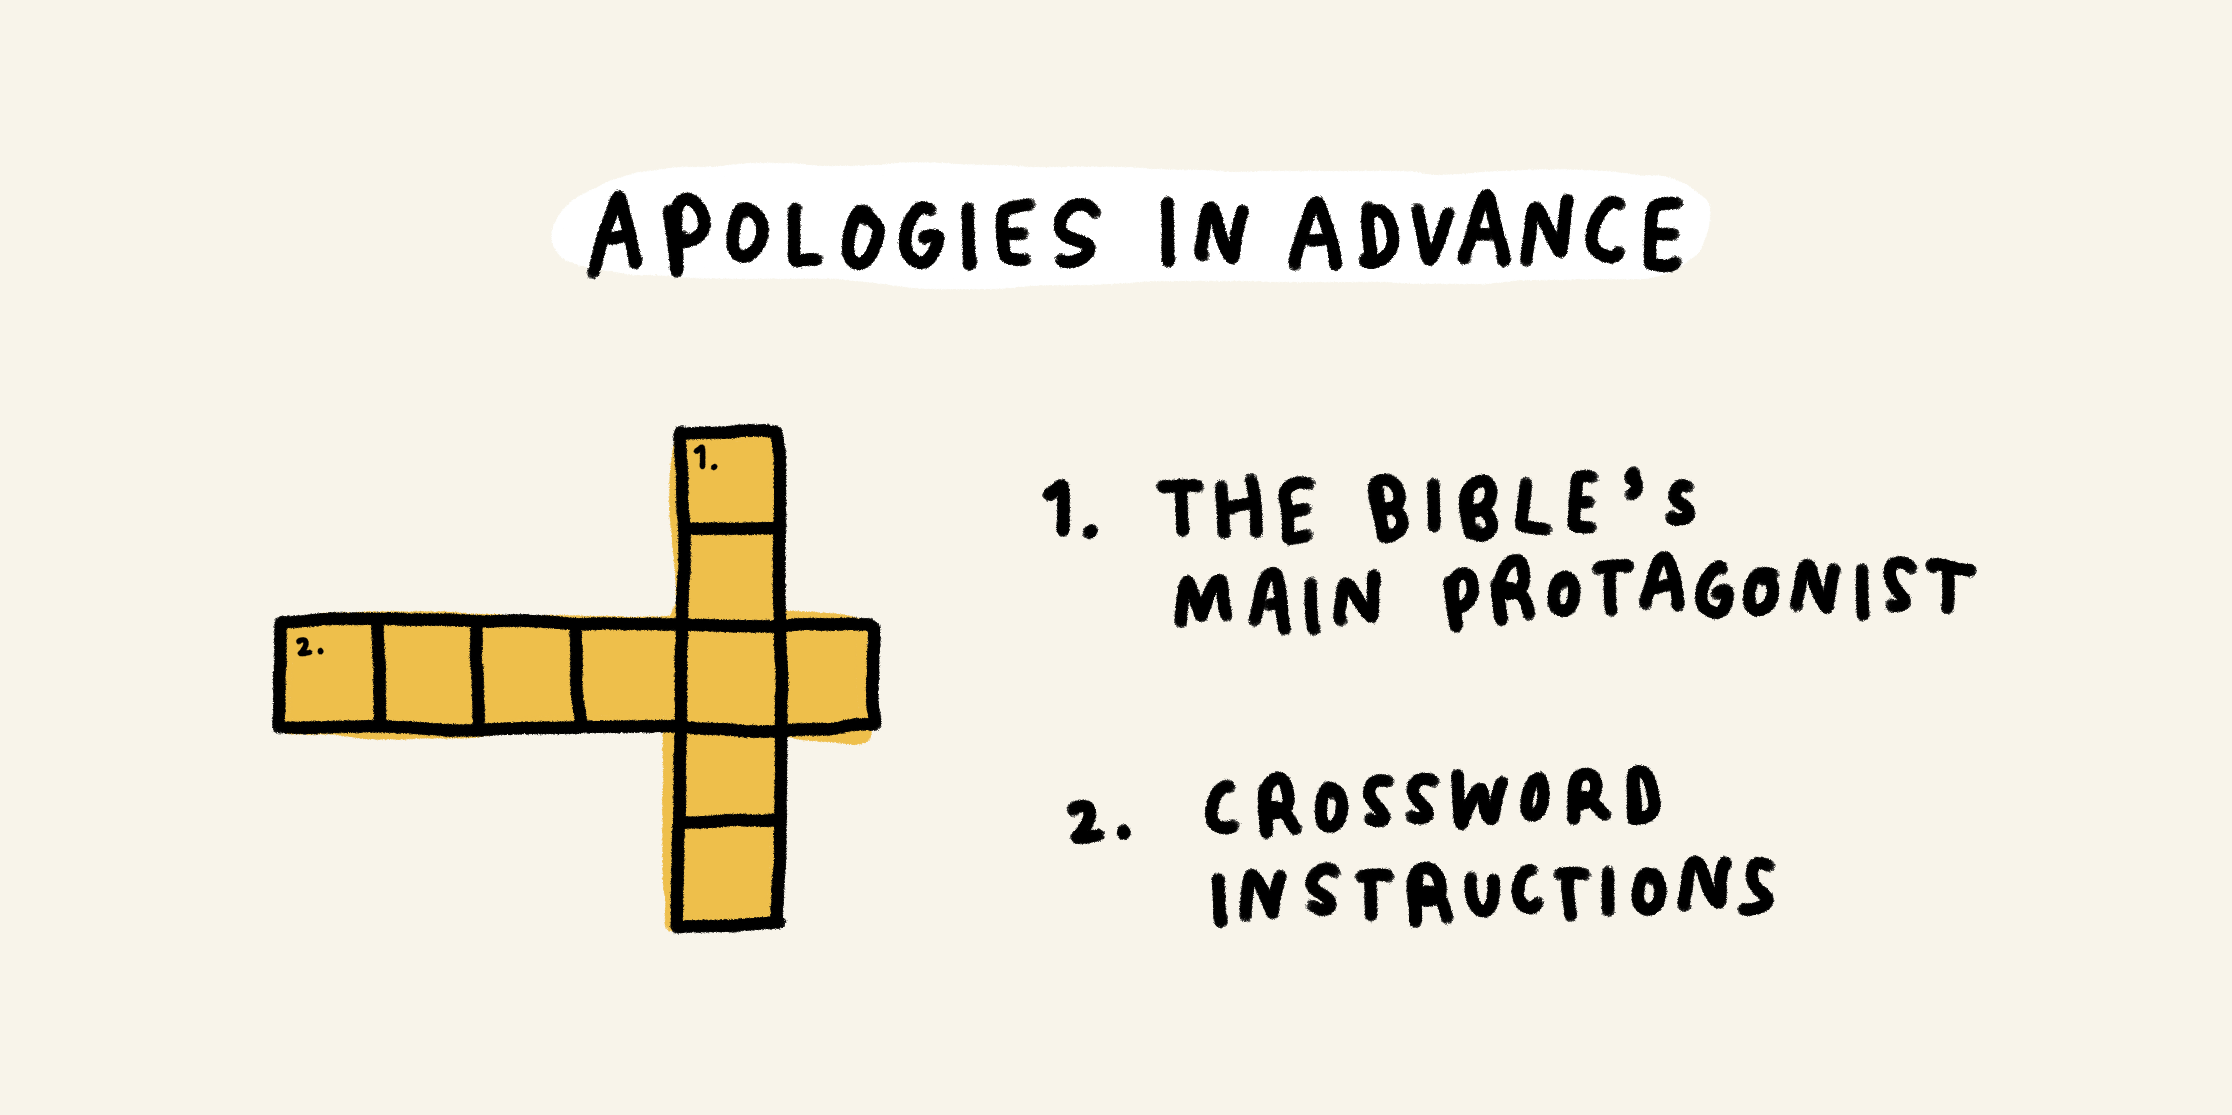 Apologies in advance

(A crossword)
1 down: the Bible's main protagonist
2 across: crossword instructions